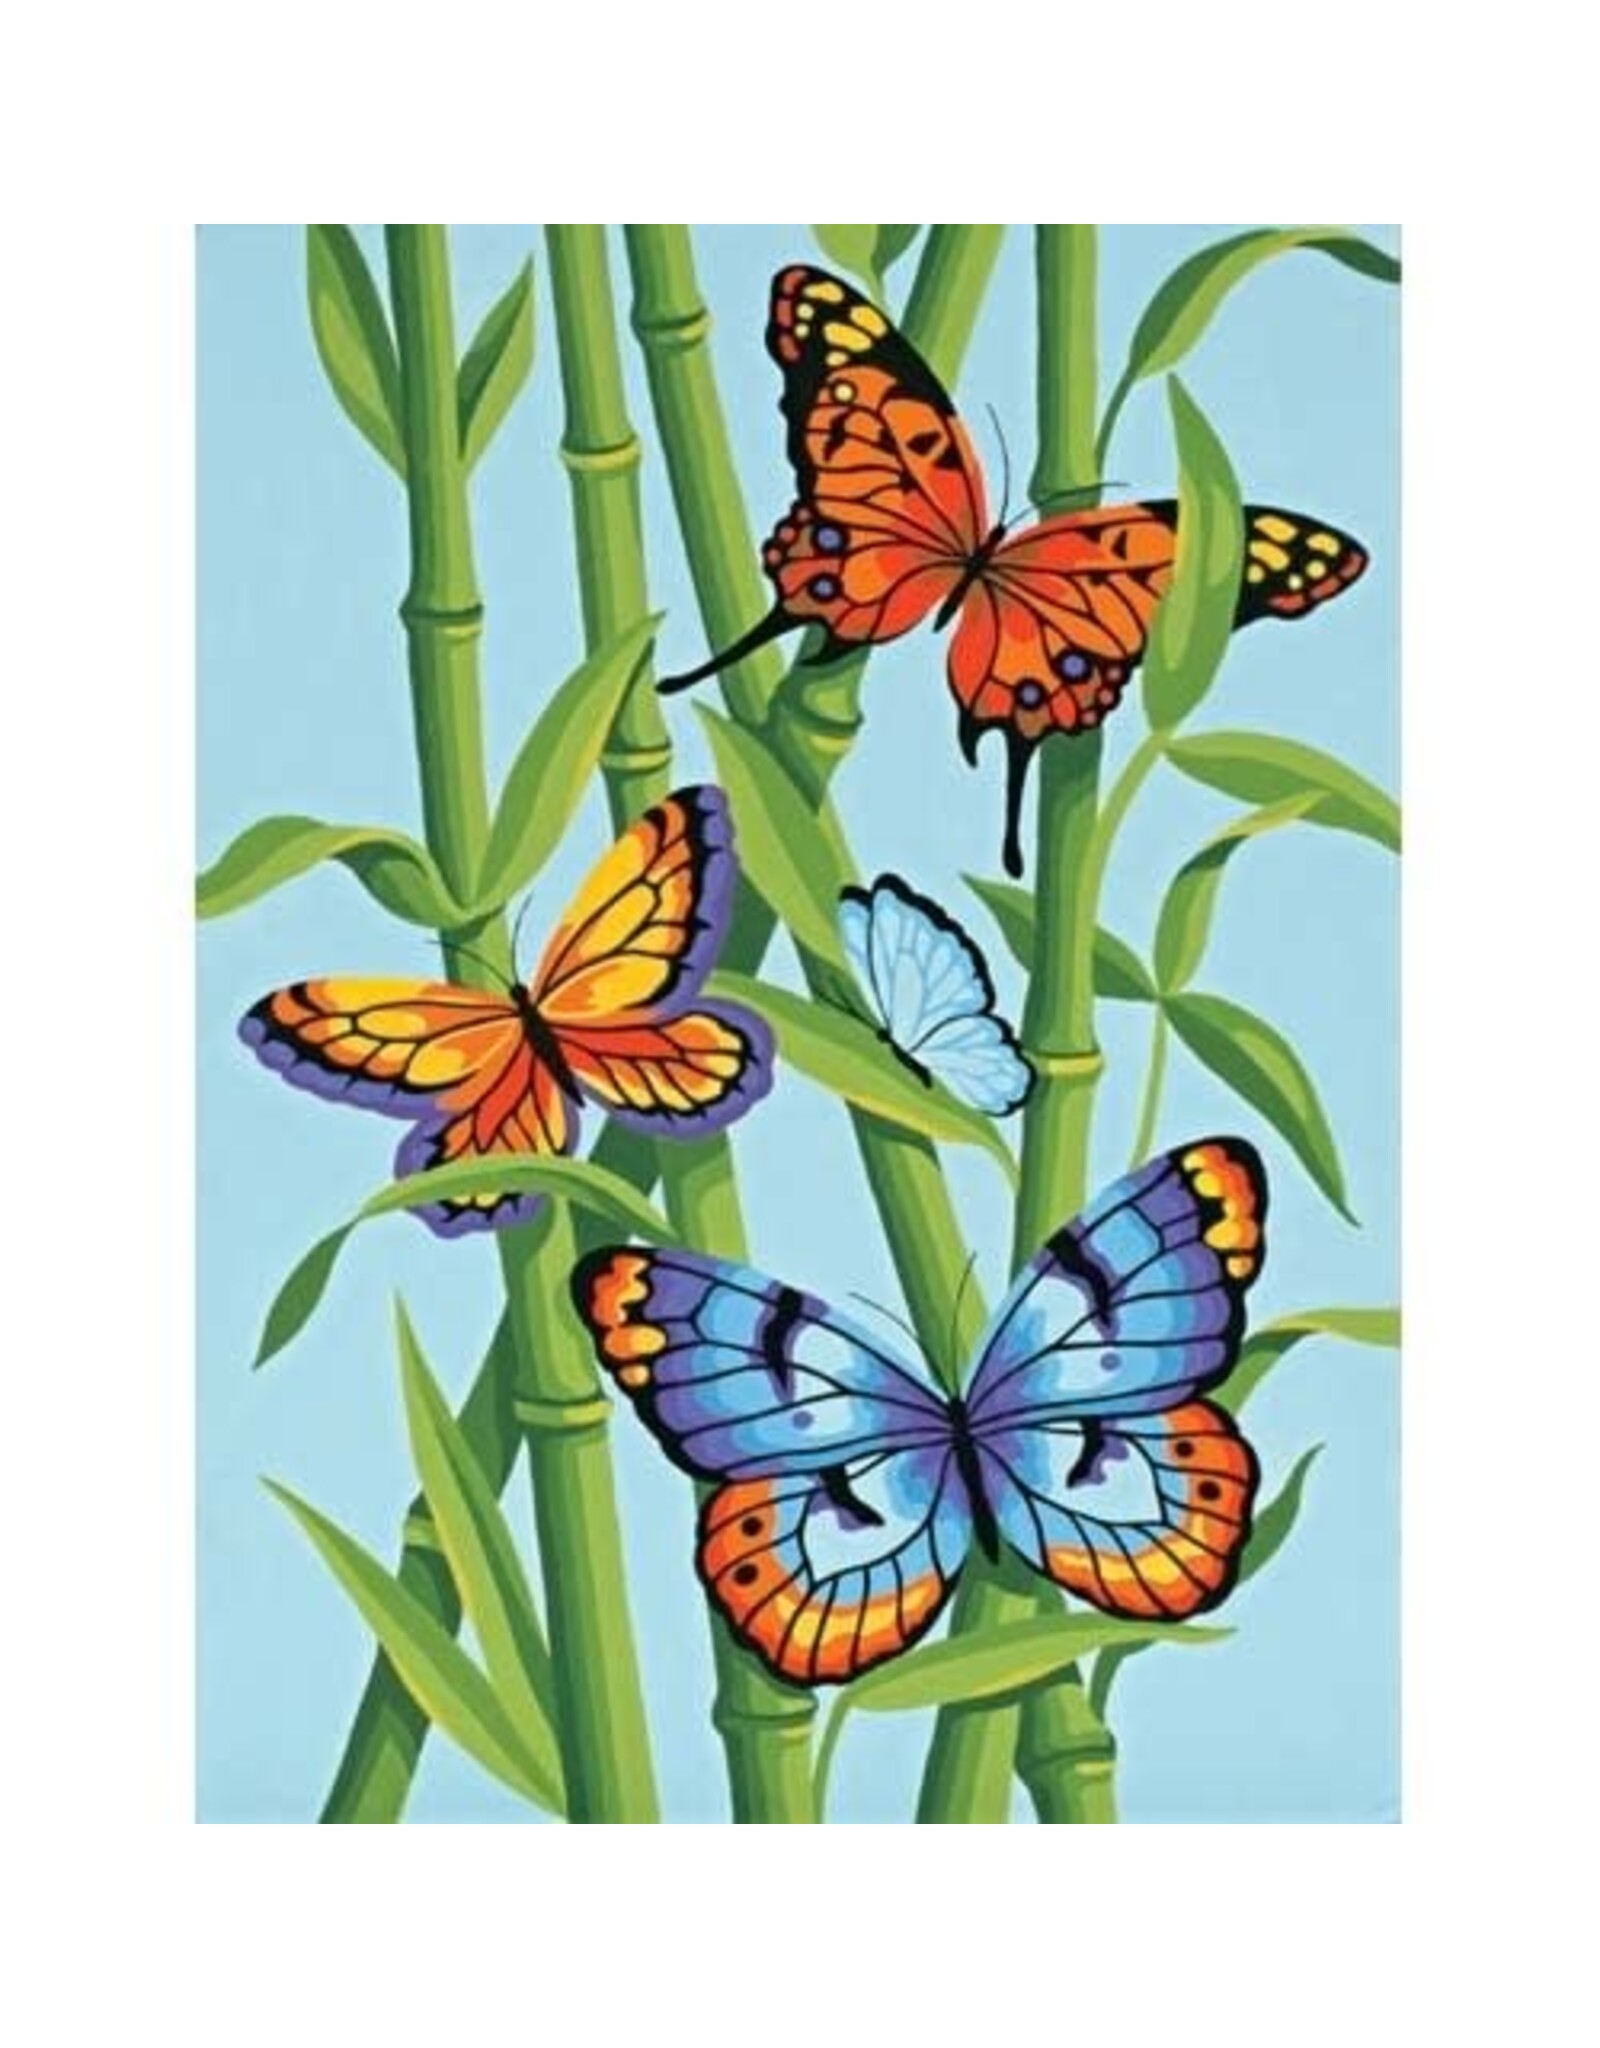 Dimensions BUTTERFLIES AND BAMBOO, 9x12